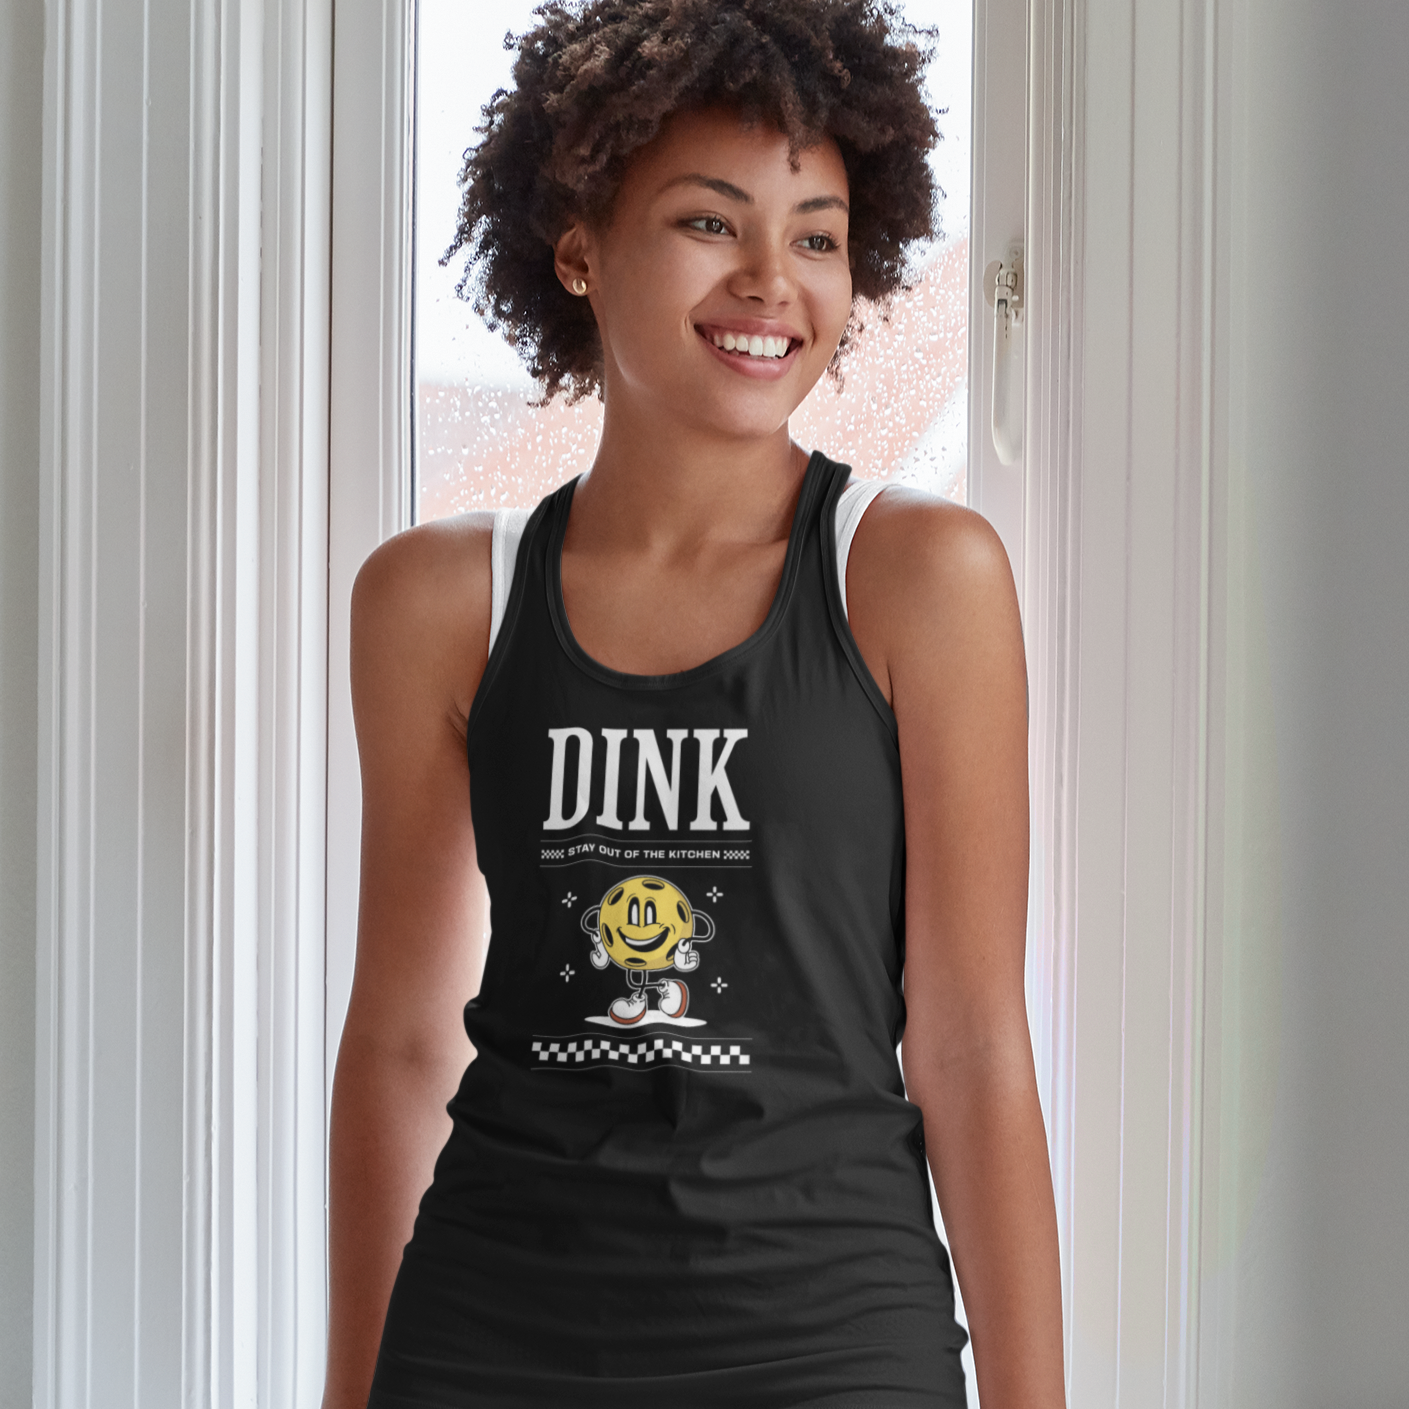 Dink Stay Out Of The Kitchen Women's Racerback Tank